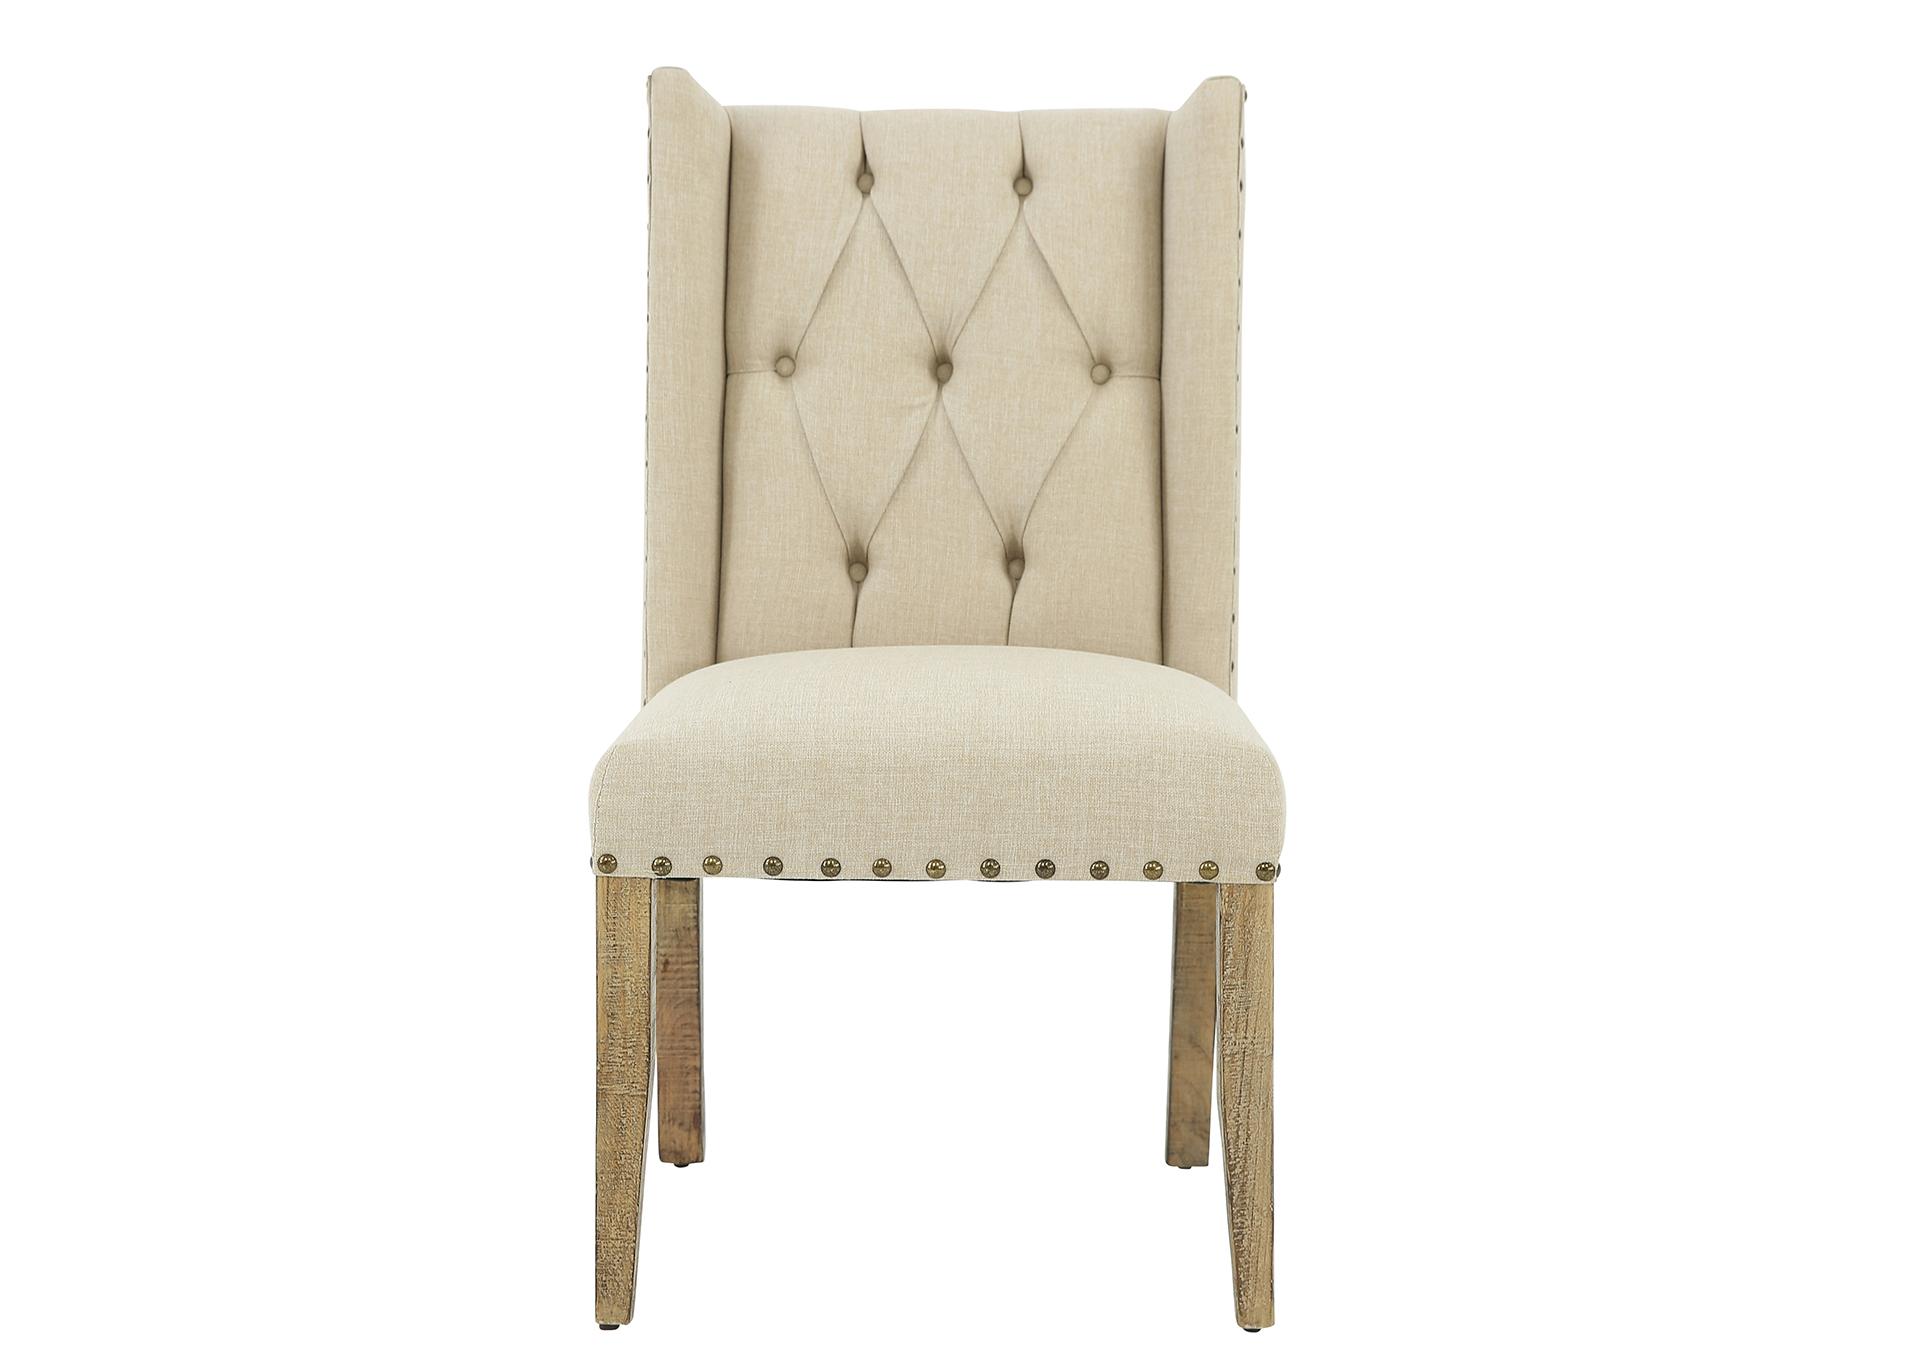 RENO UPH TUFTED SIDE CHAIR,URBAN ROADS